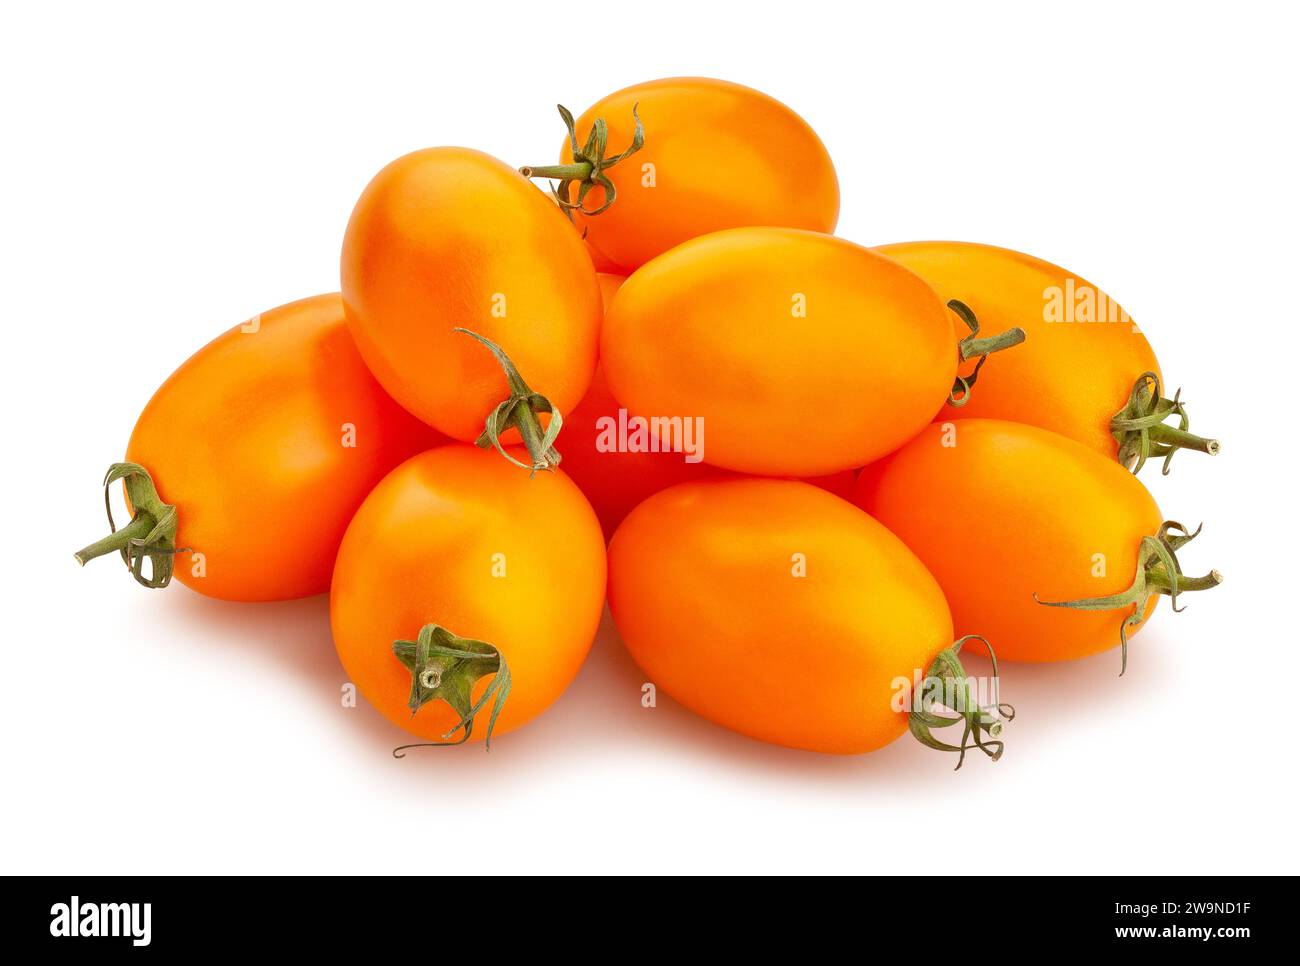 Chemin de tomate prune orange isolated on white Banque D'Images